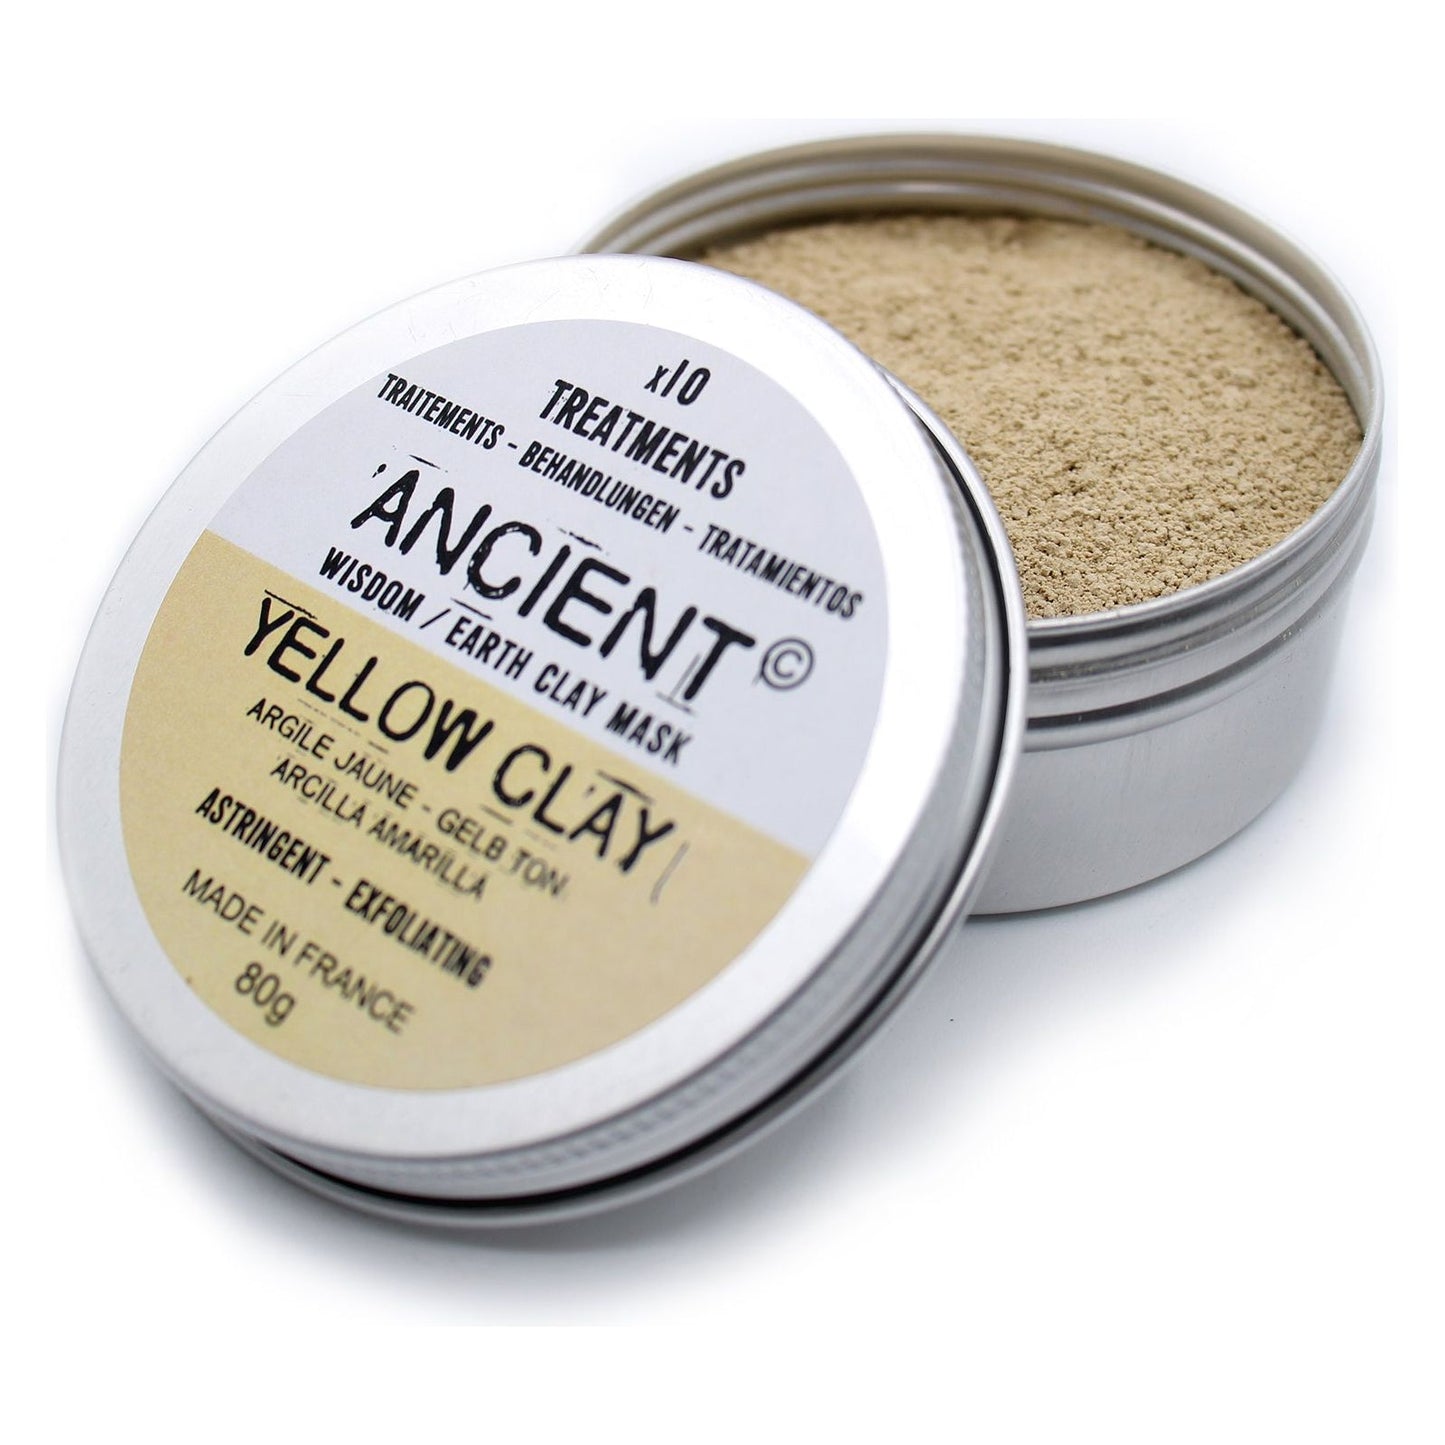 Yellow Clay 80g - Ashton and Finch